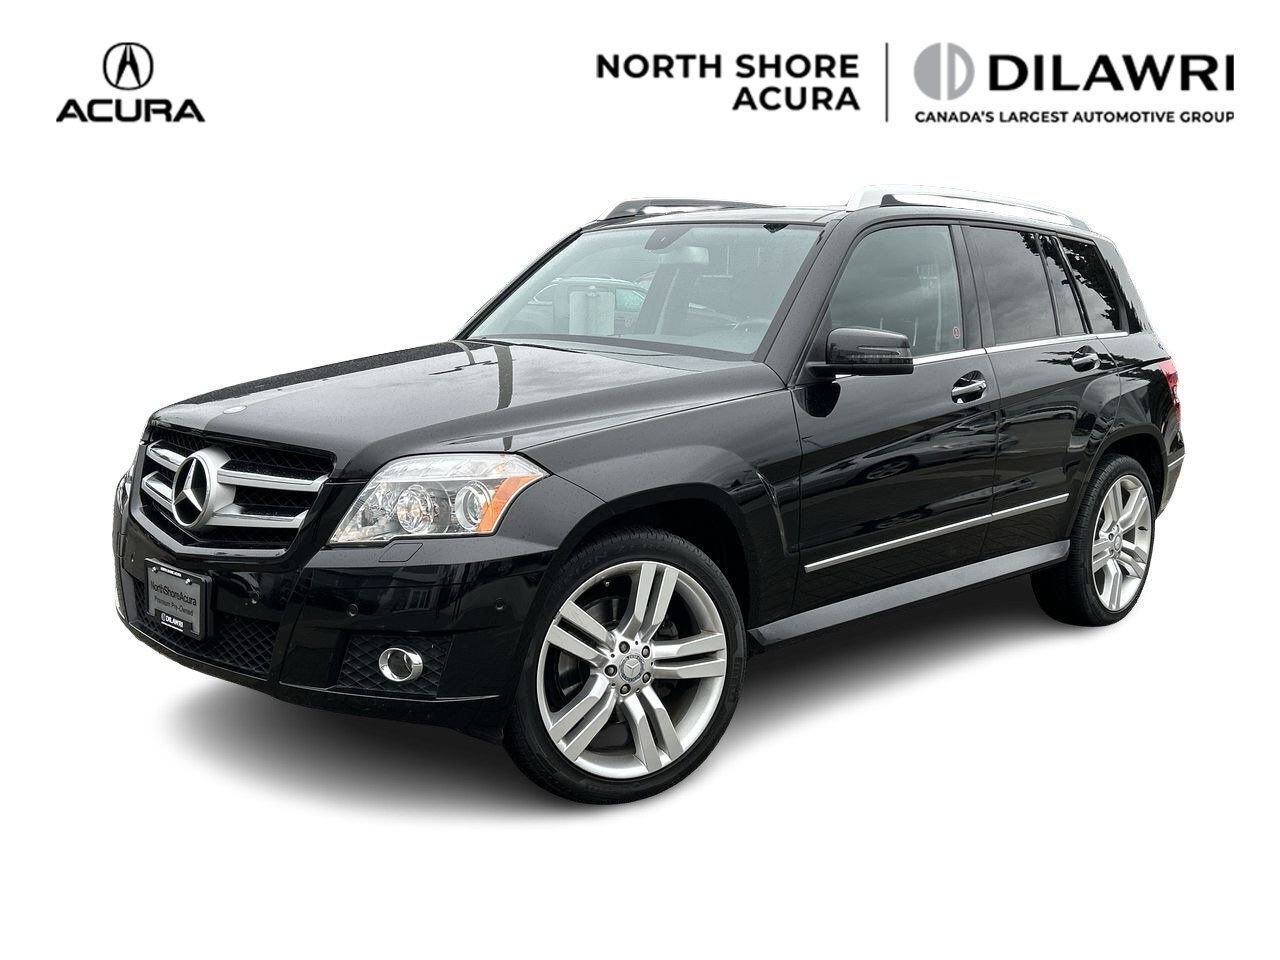 2010 Mercedes-Benz GLK350 4MATIC * LOW KMS, Leather, Navi, Sunroof, AWD*